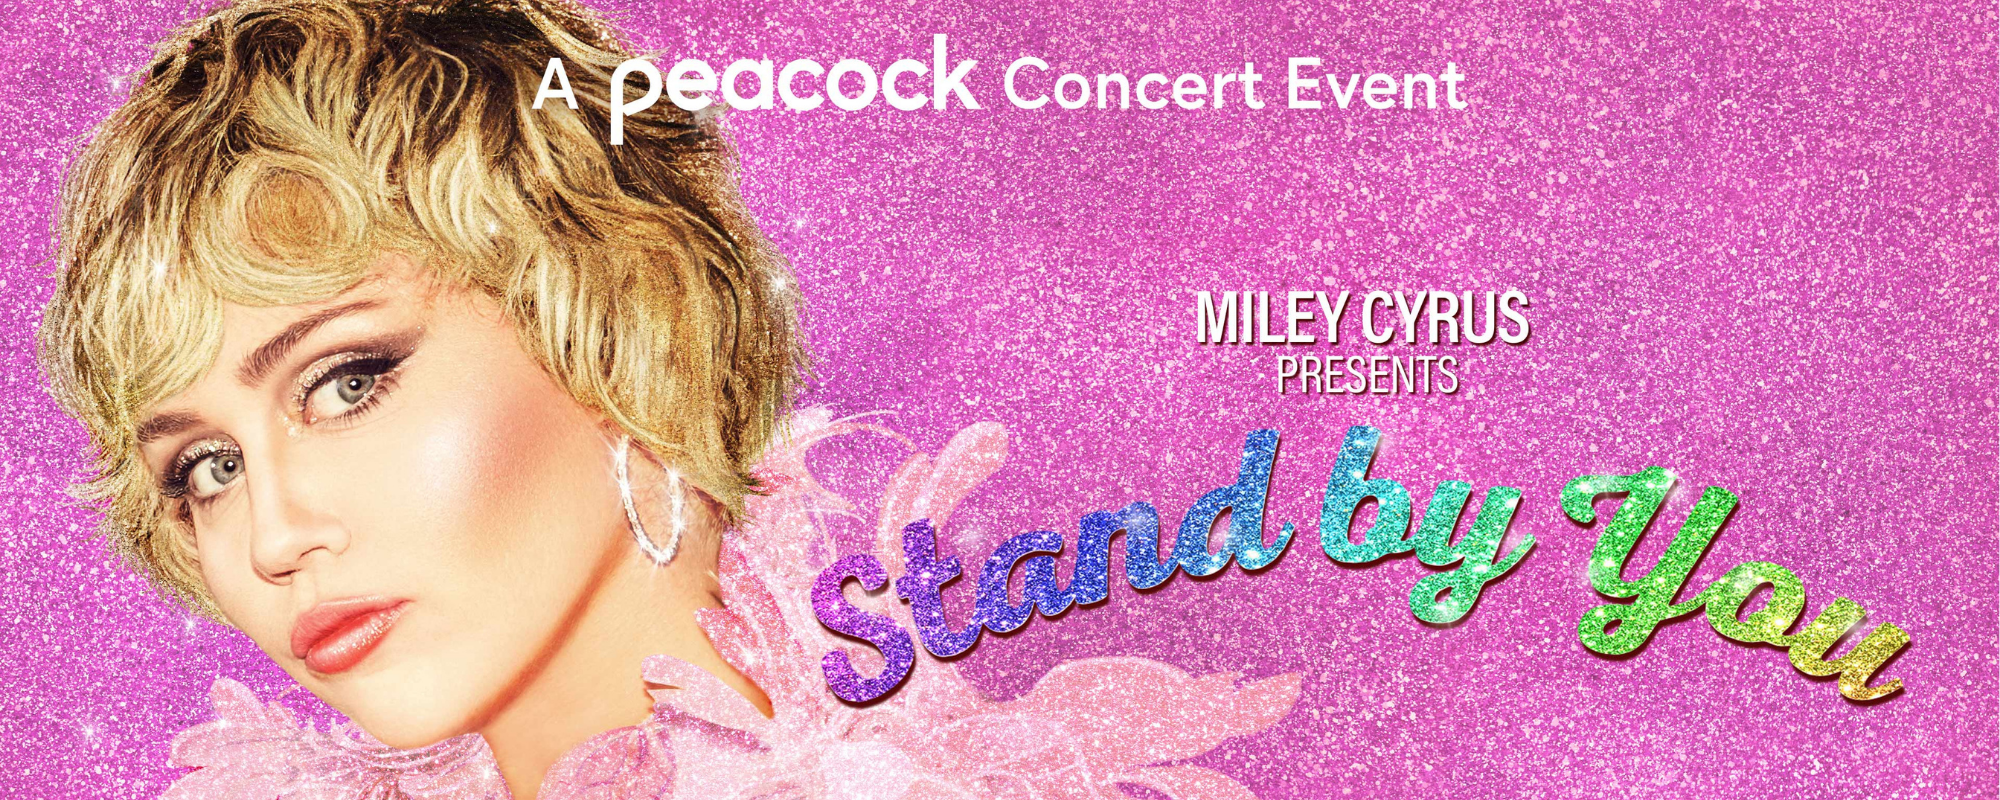 Miley Cyrus To Host Pride Special on Peacock: “Everybody Is Welcome Here”